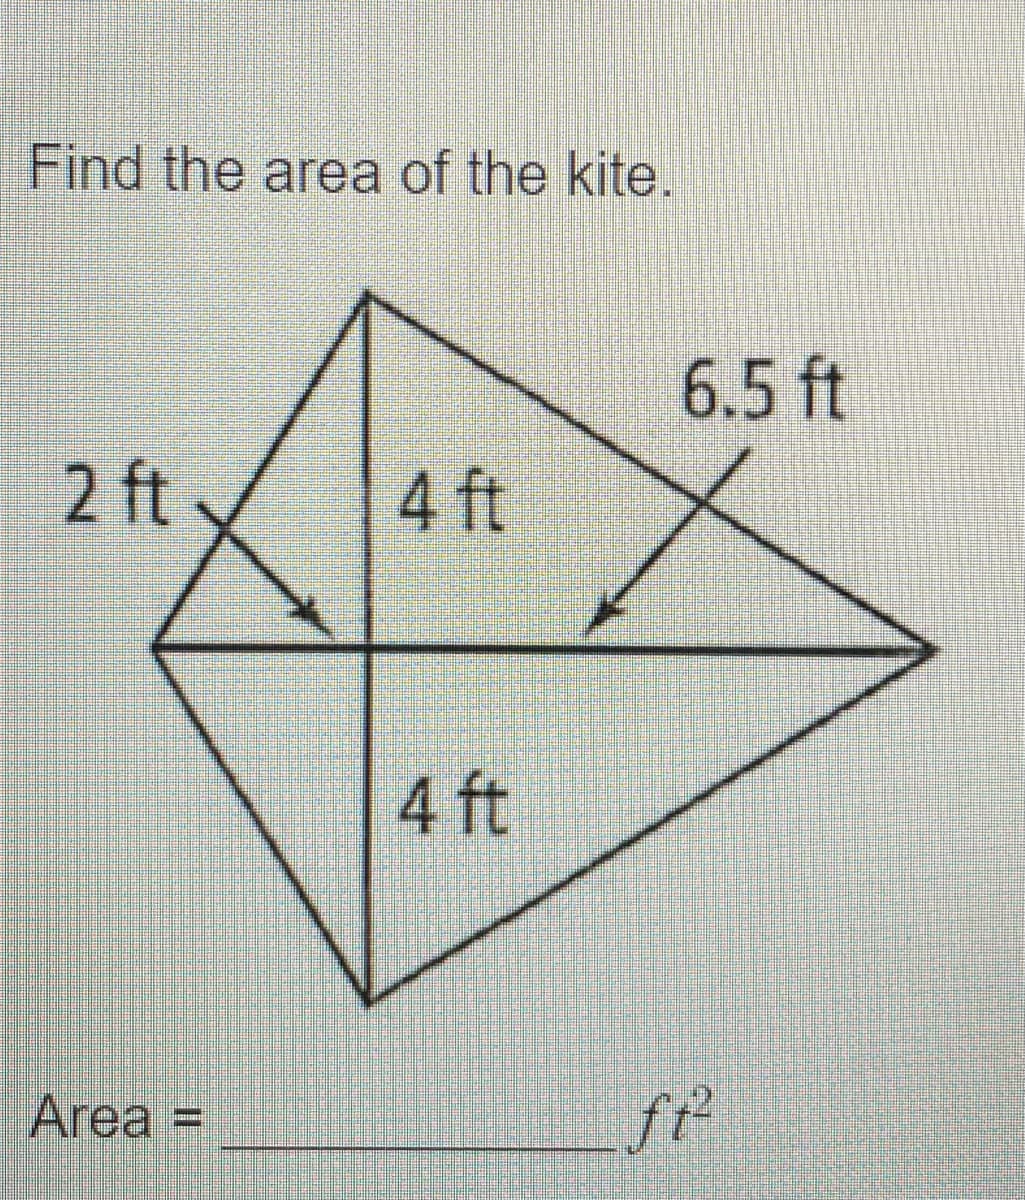 Find the area of the kite.
6.5 ft
2 ft v
4 ft
4 ft
Area =
